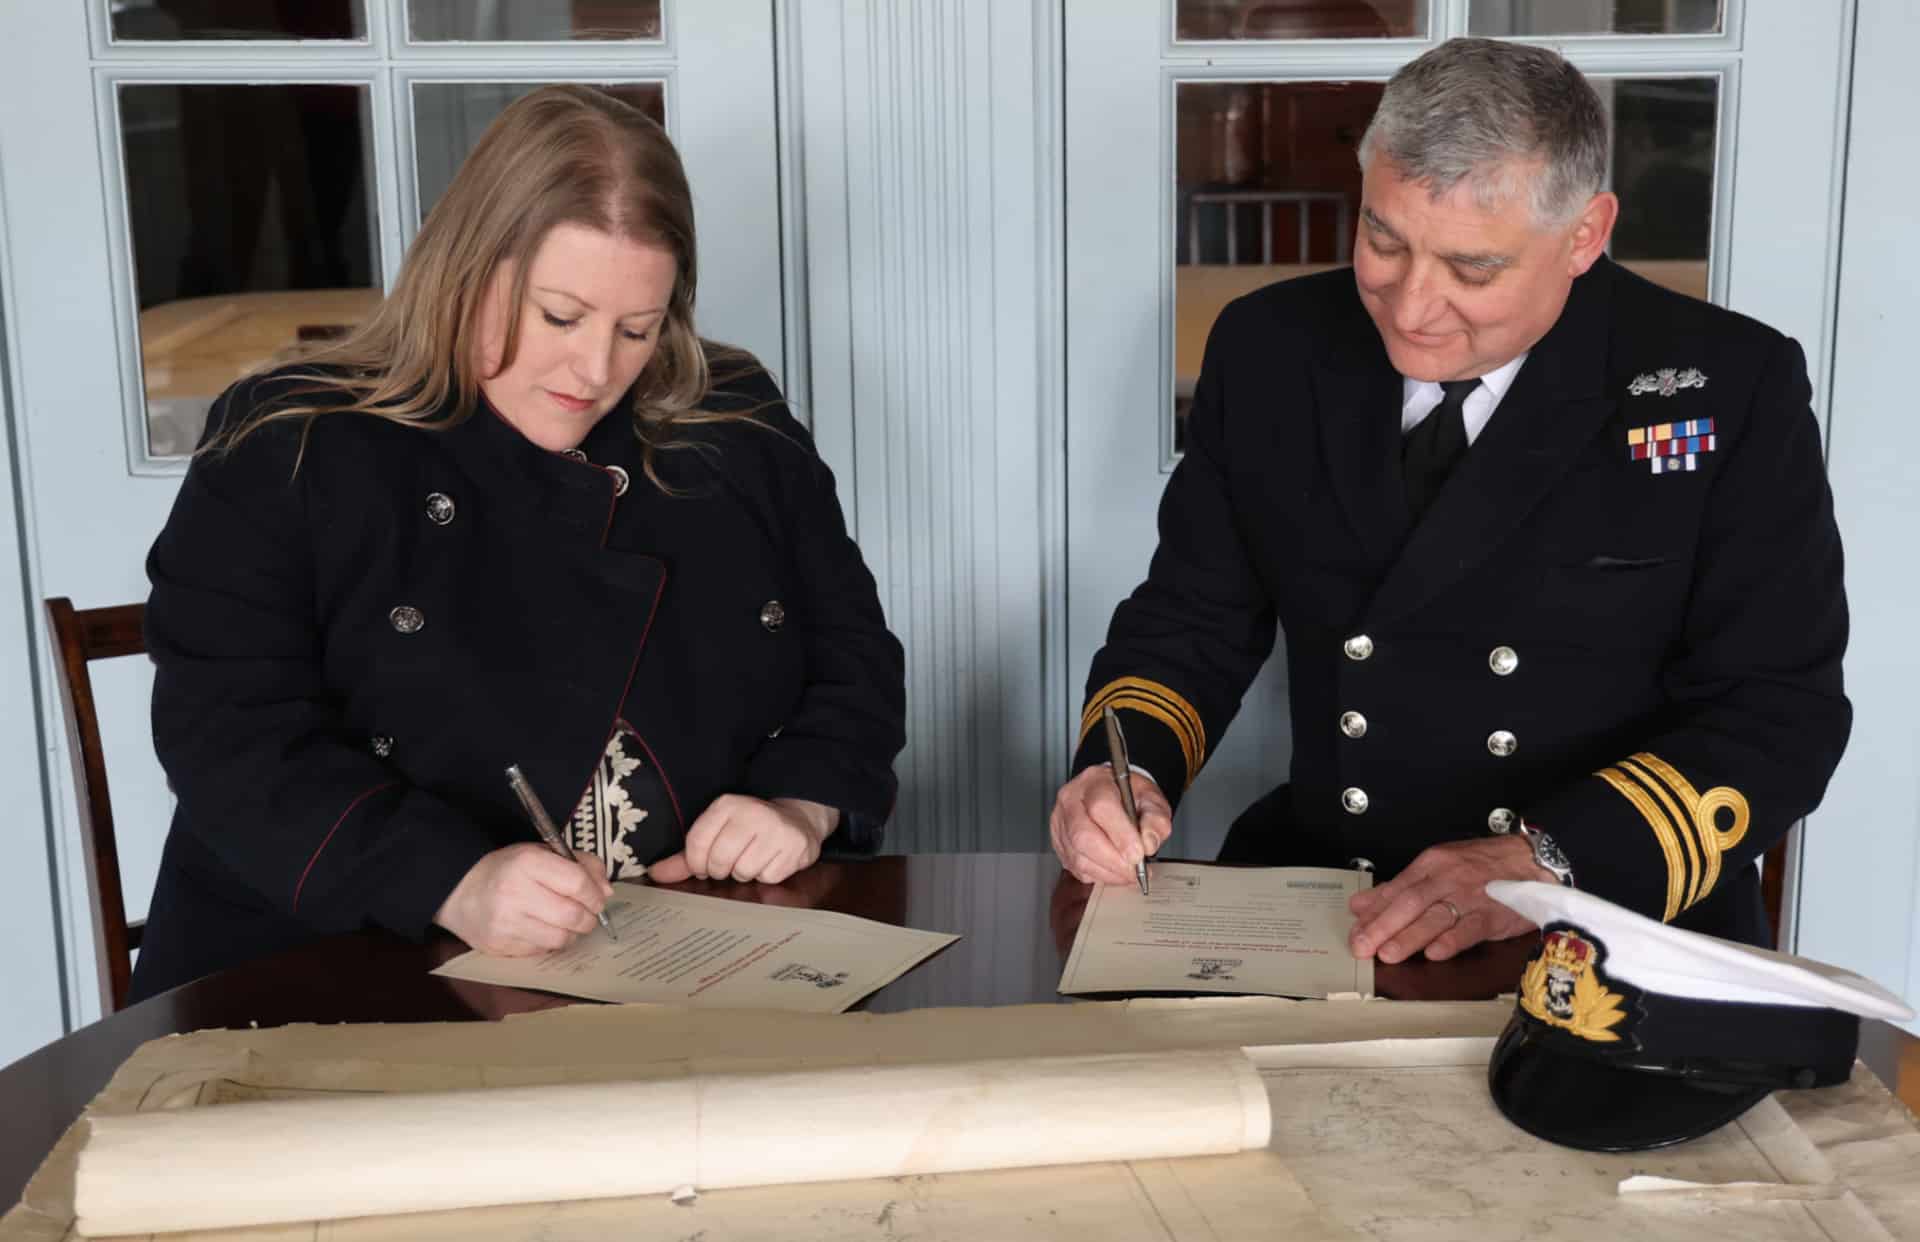 PCC Donna Jones and Lieutenant Commander BJ Smith, Commanding Officer of HMS Victory signing the covenant,